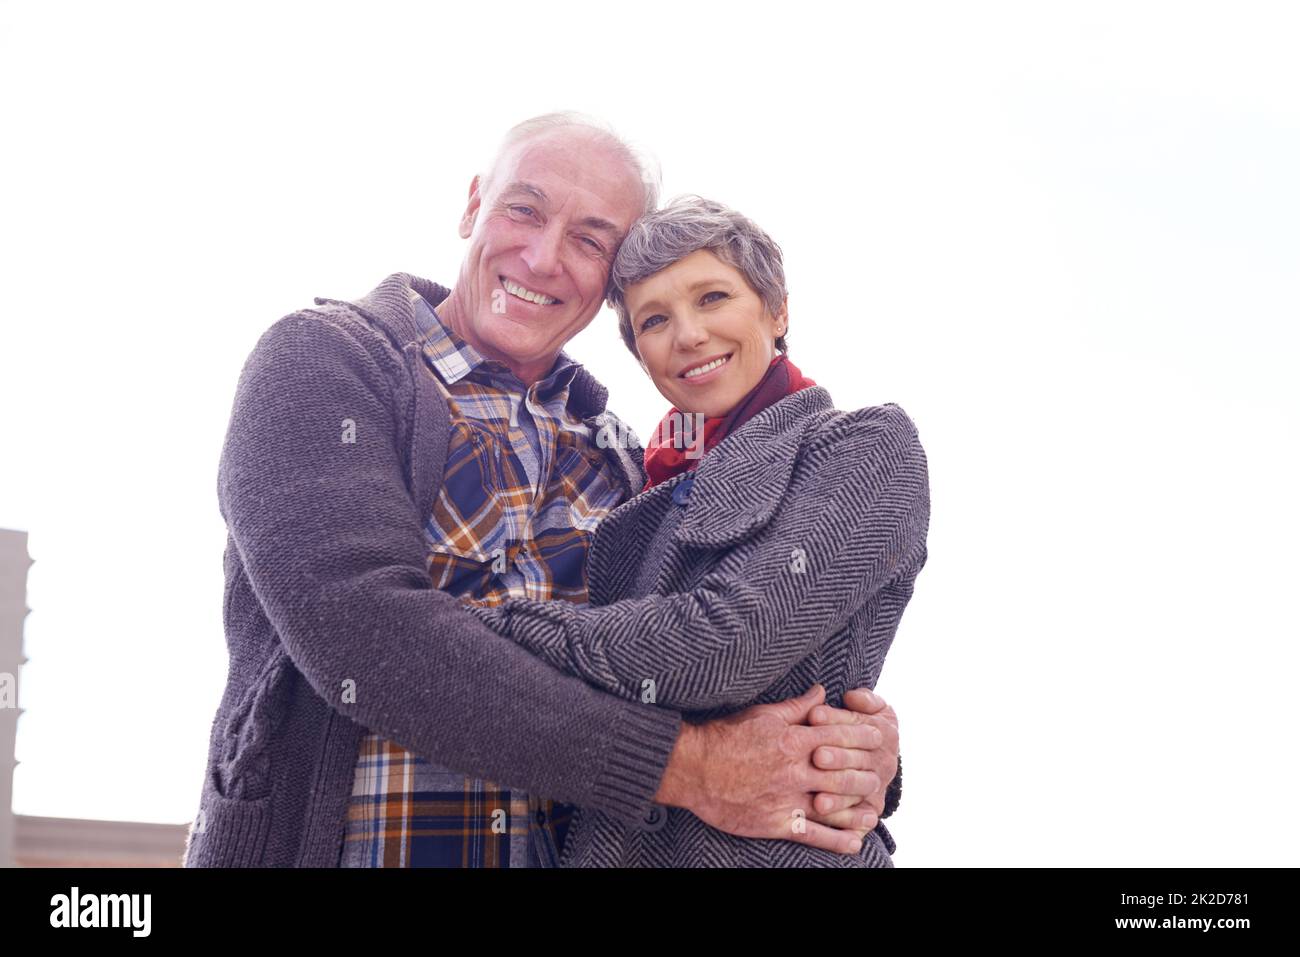 True love is timeless. Portrait of a happy senior couple enjoying an affection filled moment outdoors. Stock Photo